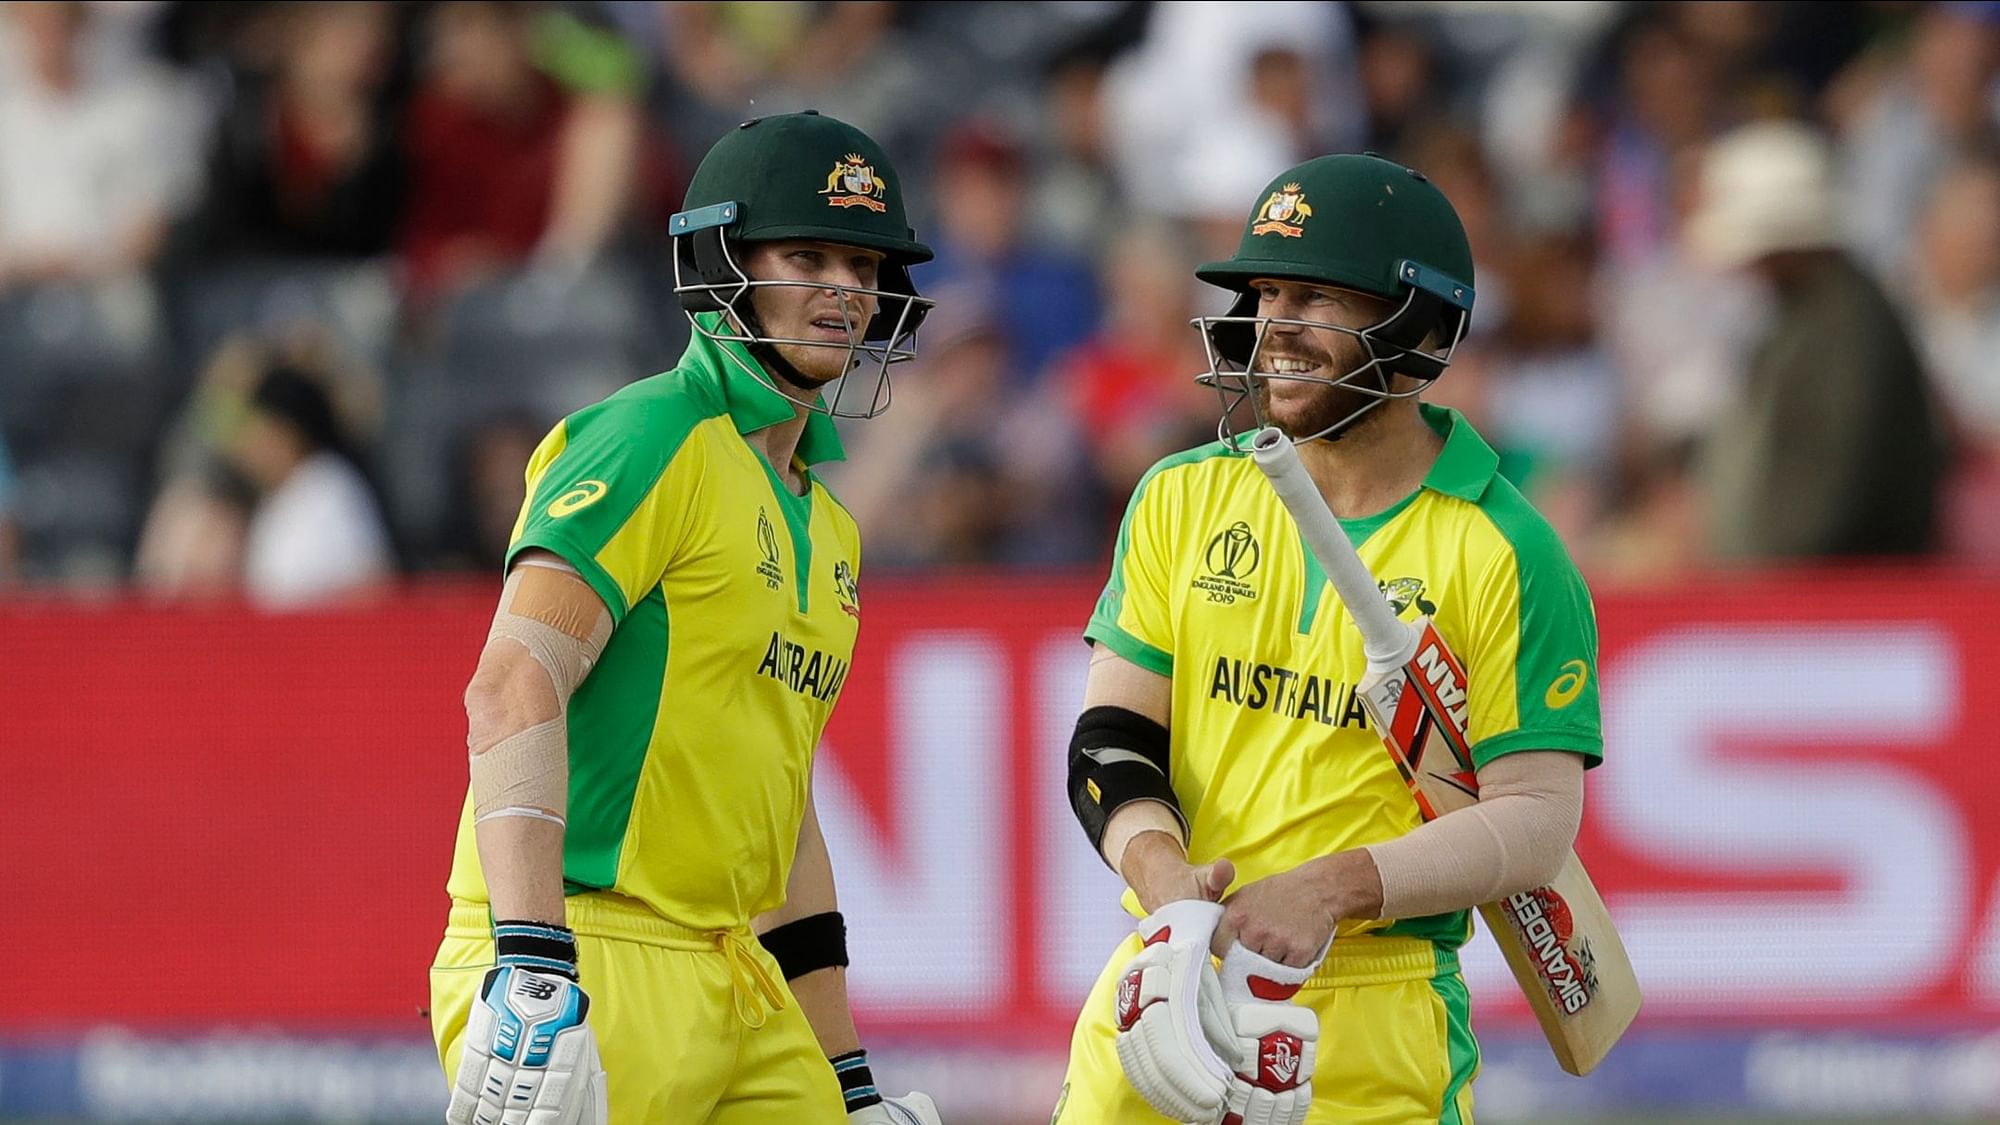 Australia’s Steve Smith, left, and Australia’s David Warner chat after their first batting over together during the Cricket World Cup match between Afghanistan and Australia at Bristol County Ground in Bristol, England, Saturday, June 1, 2019.&nbsp;